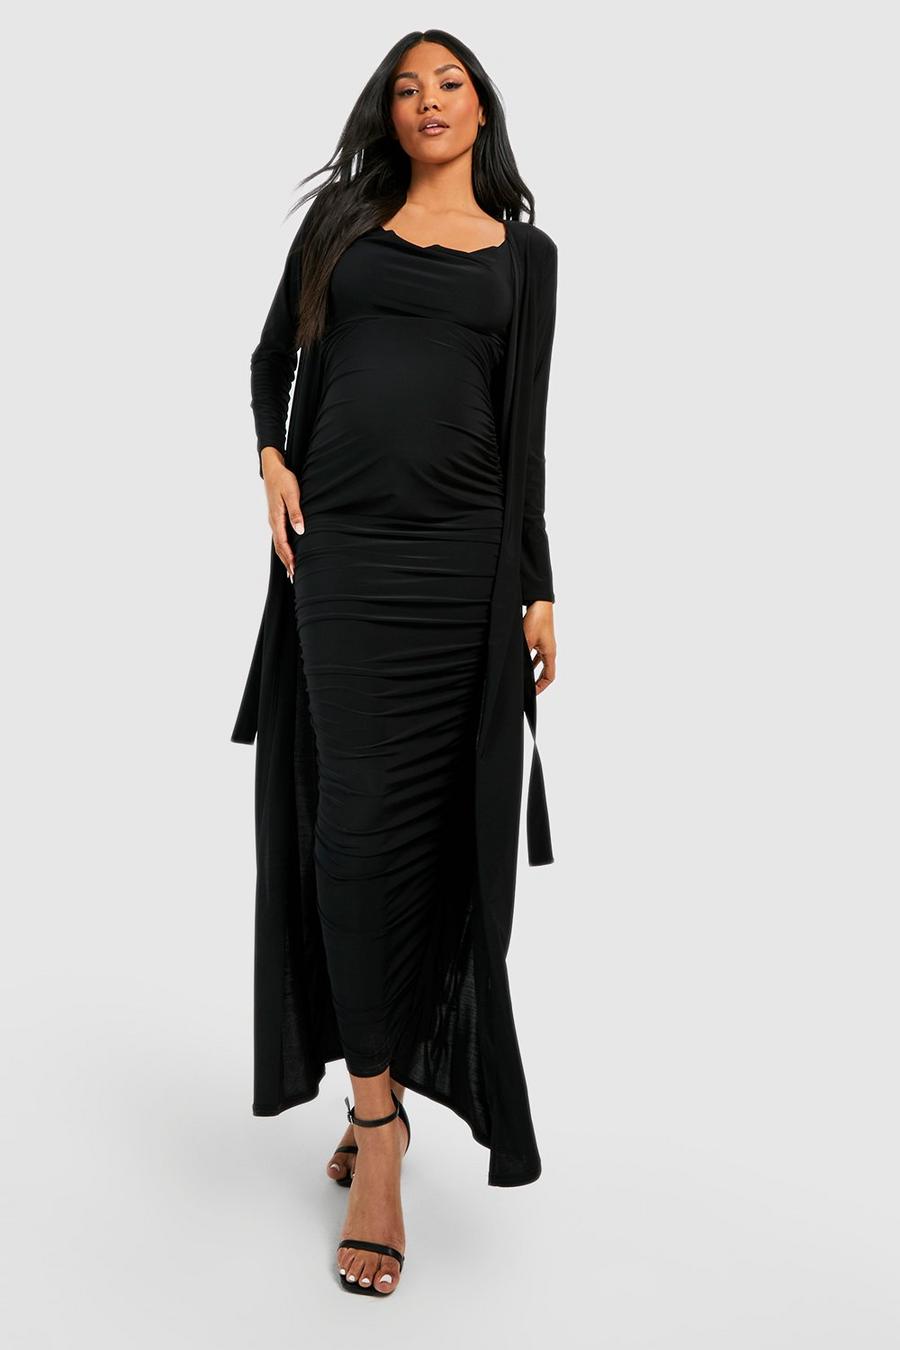 Black schwarz Maternity Maxi Strappy Cowl Dress And Duster Coat